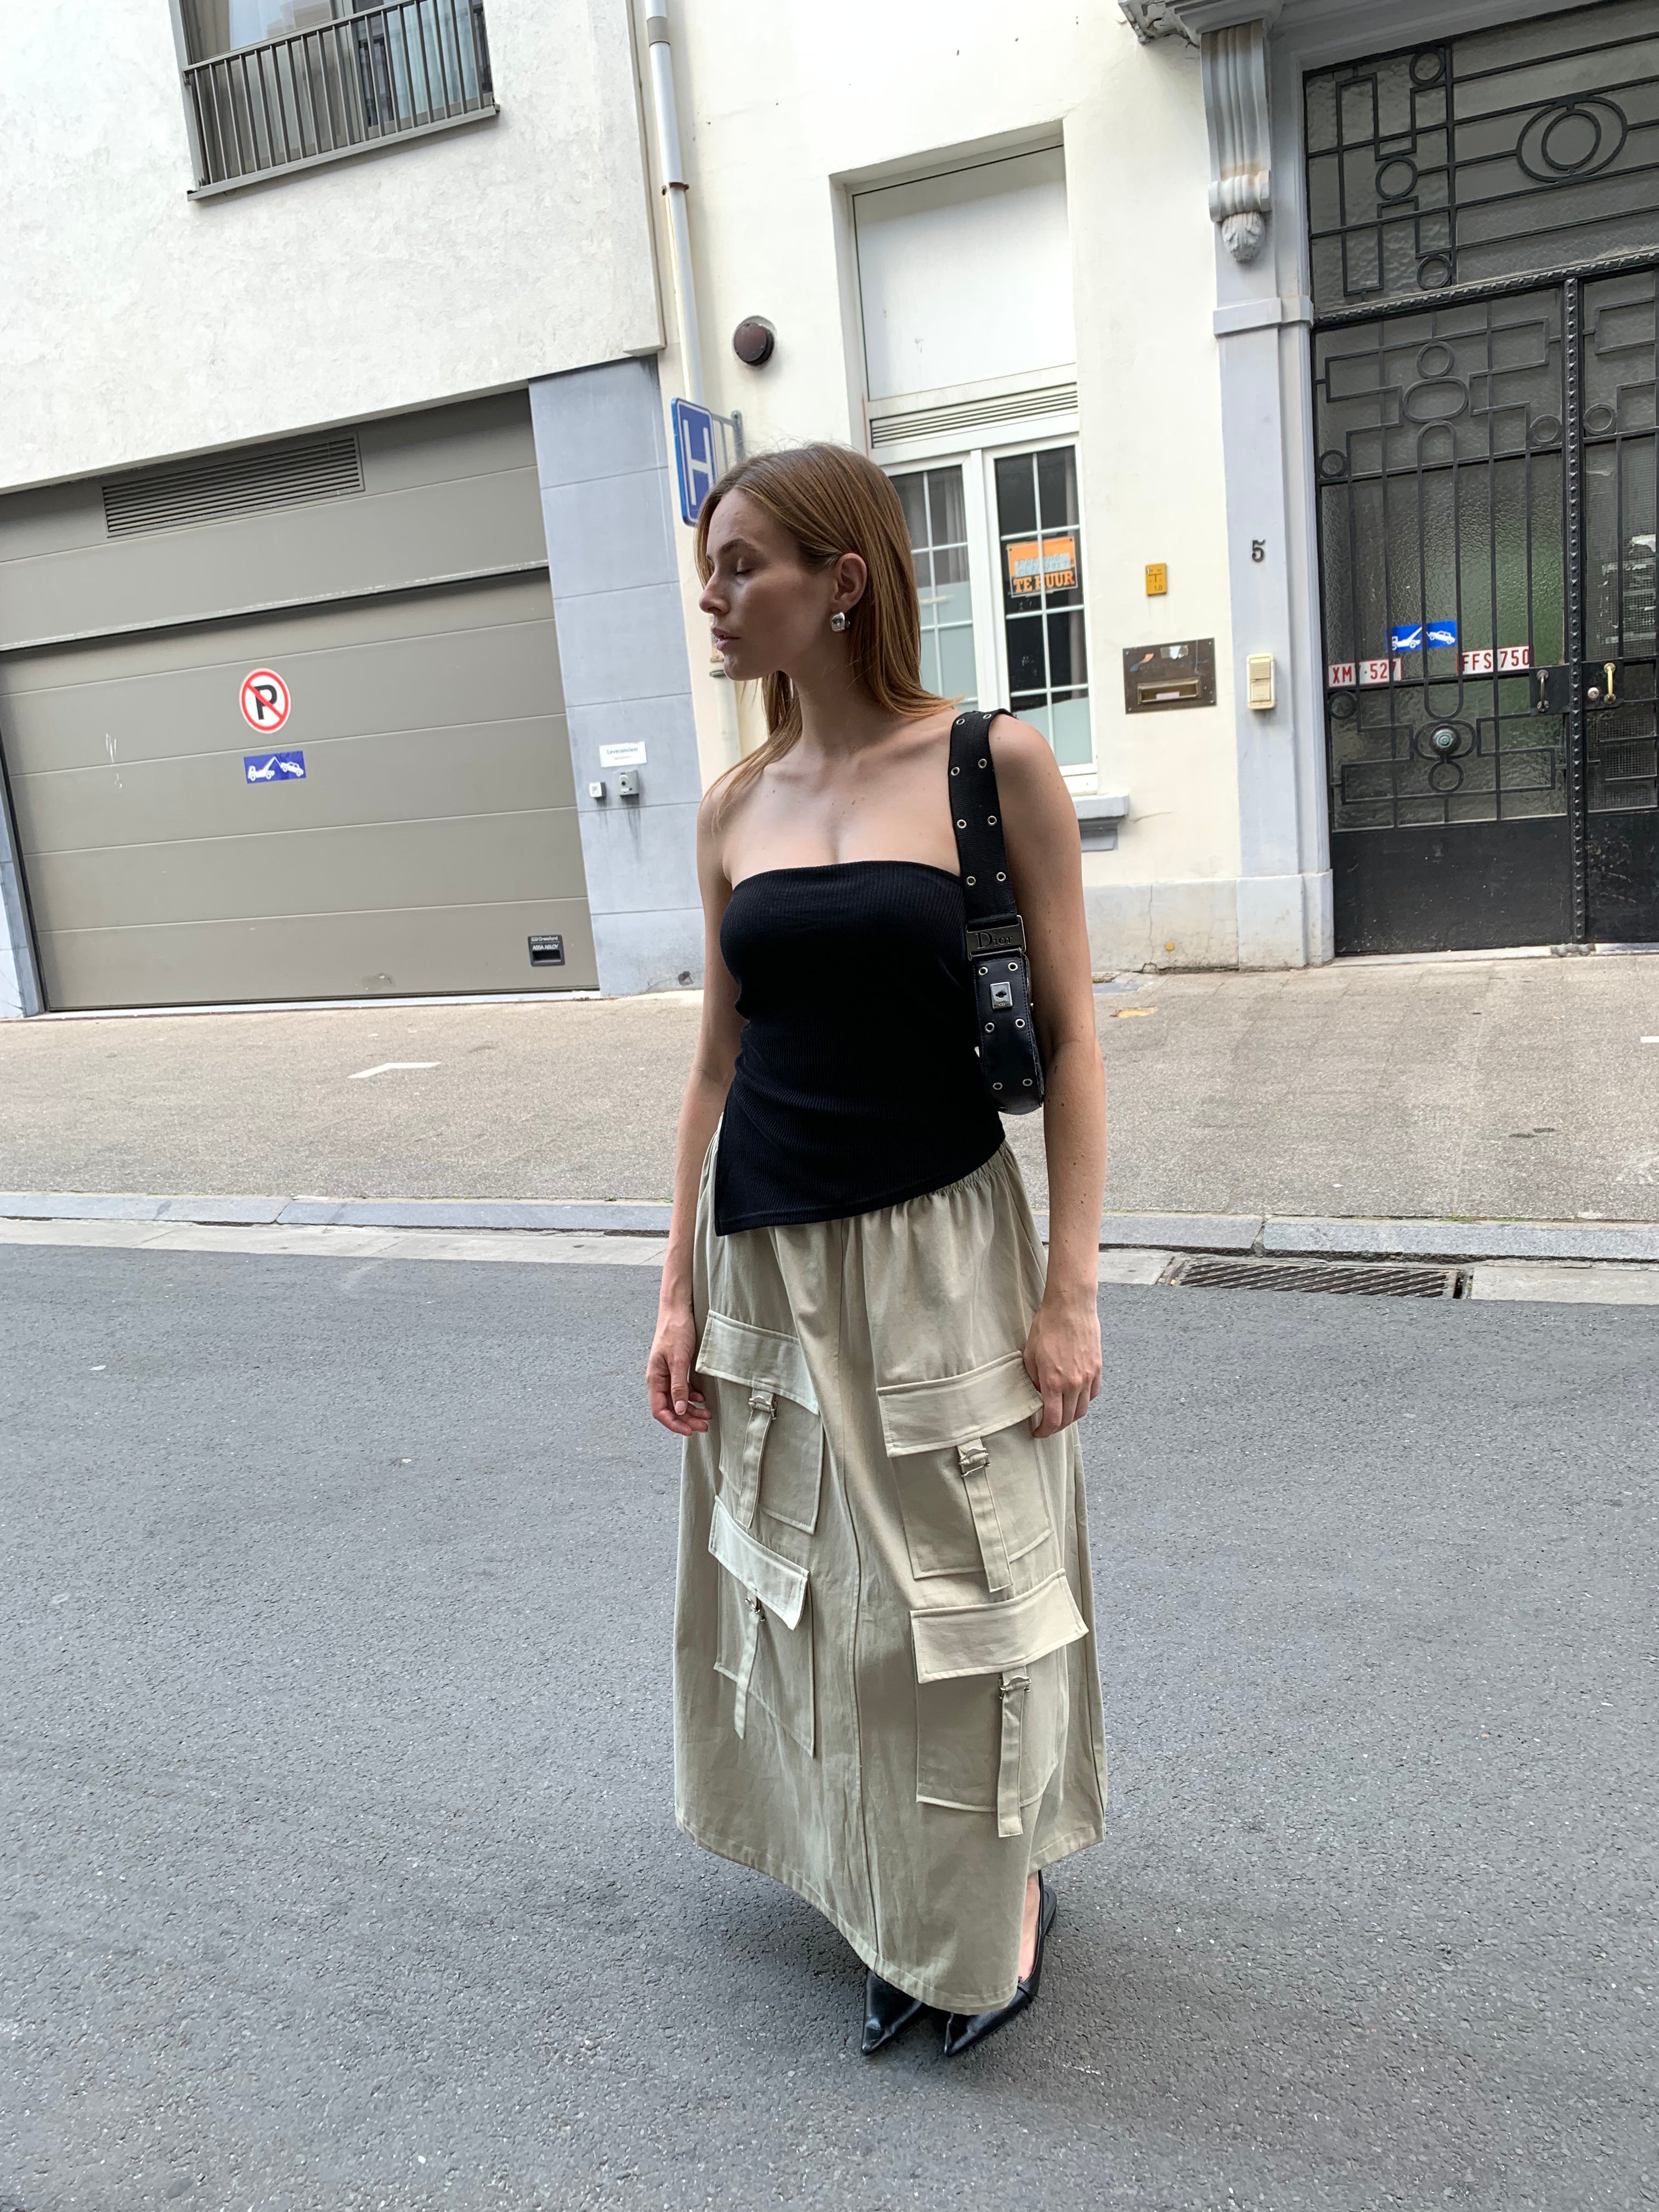 Cargo pants and skirts are trending, and these are the must-have